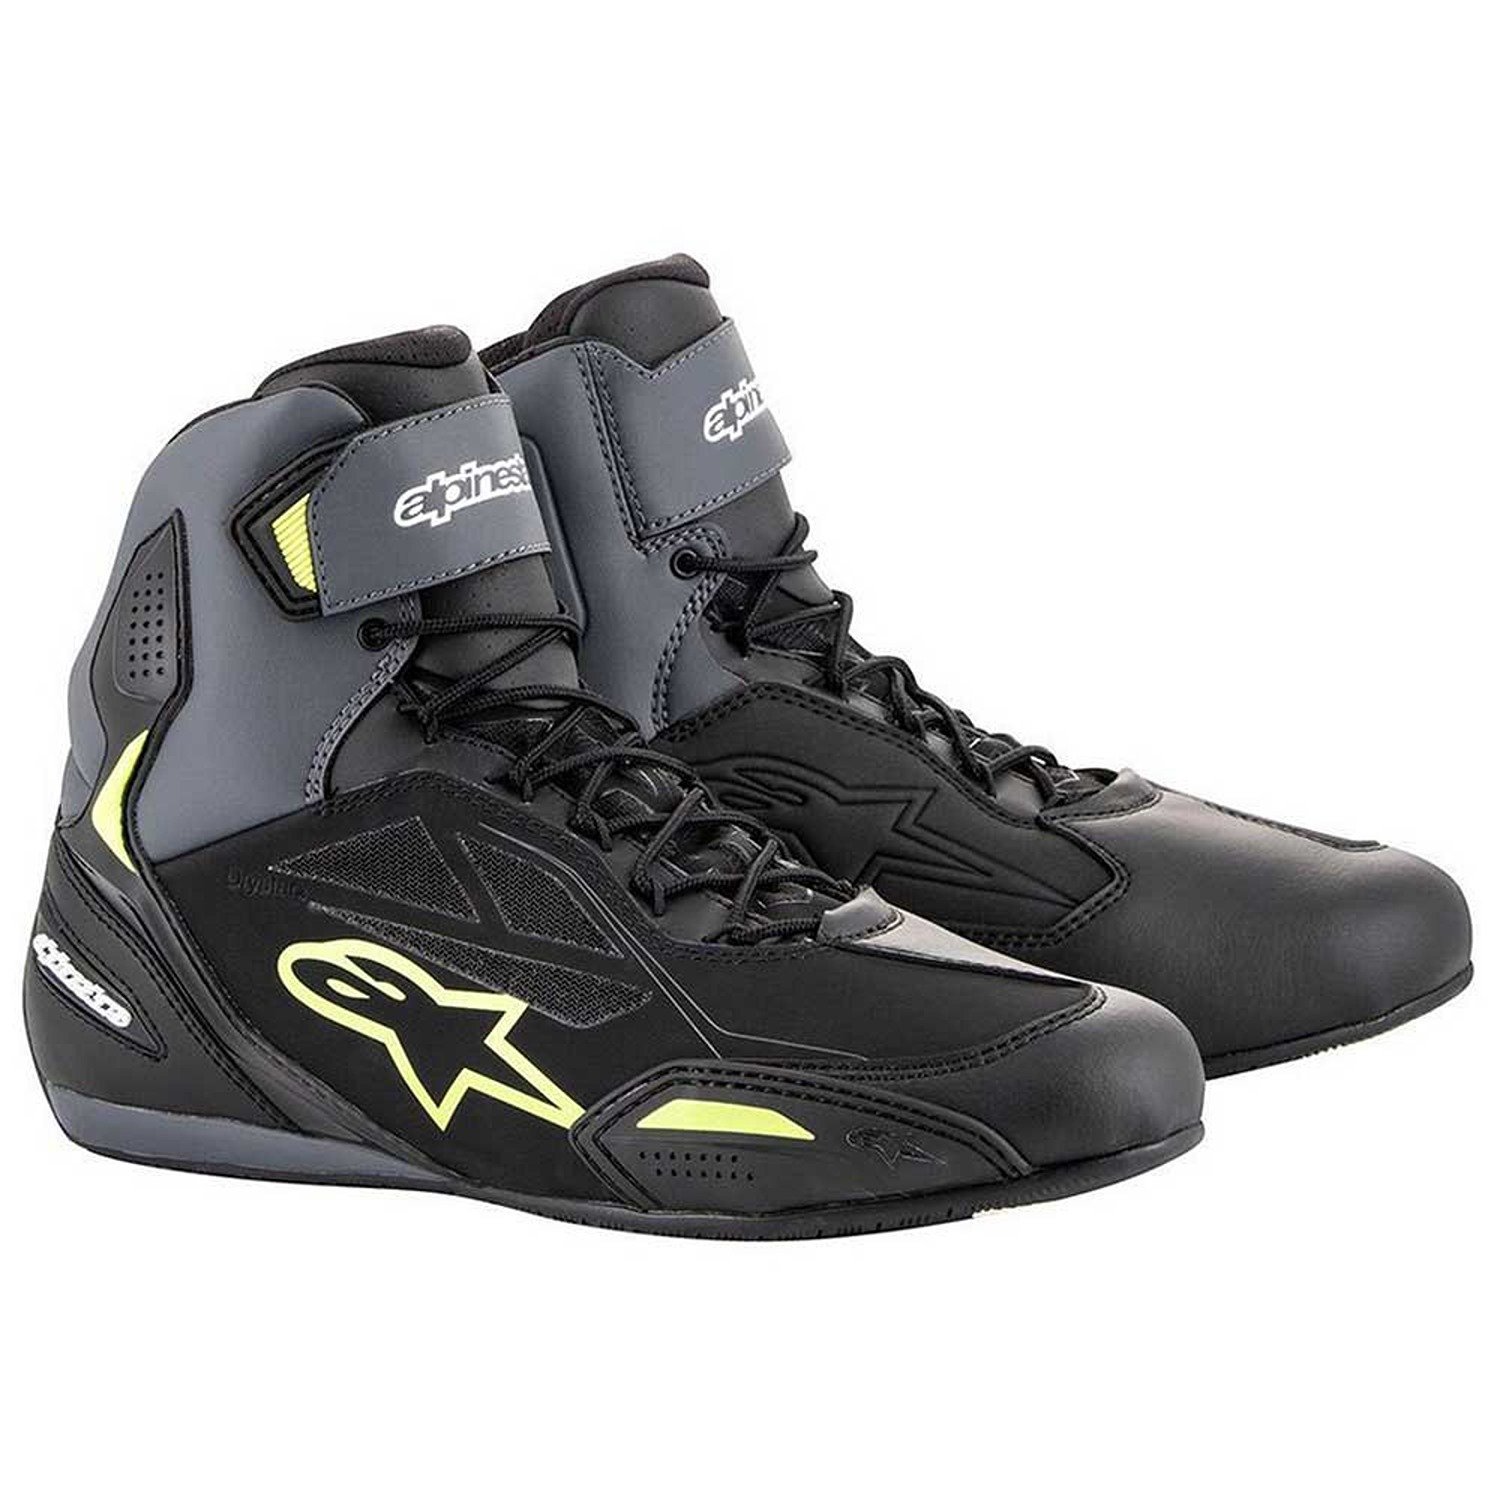 Image of Alpinestars Faster-3 Shoes Black Yellow Fluo Talla US 14